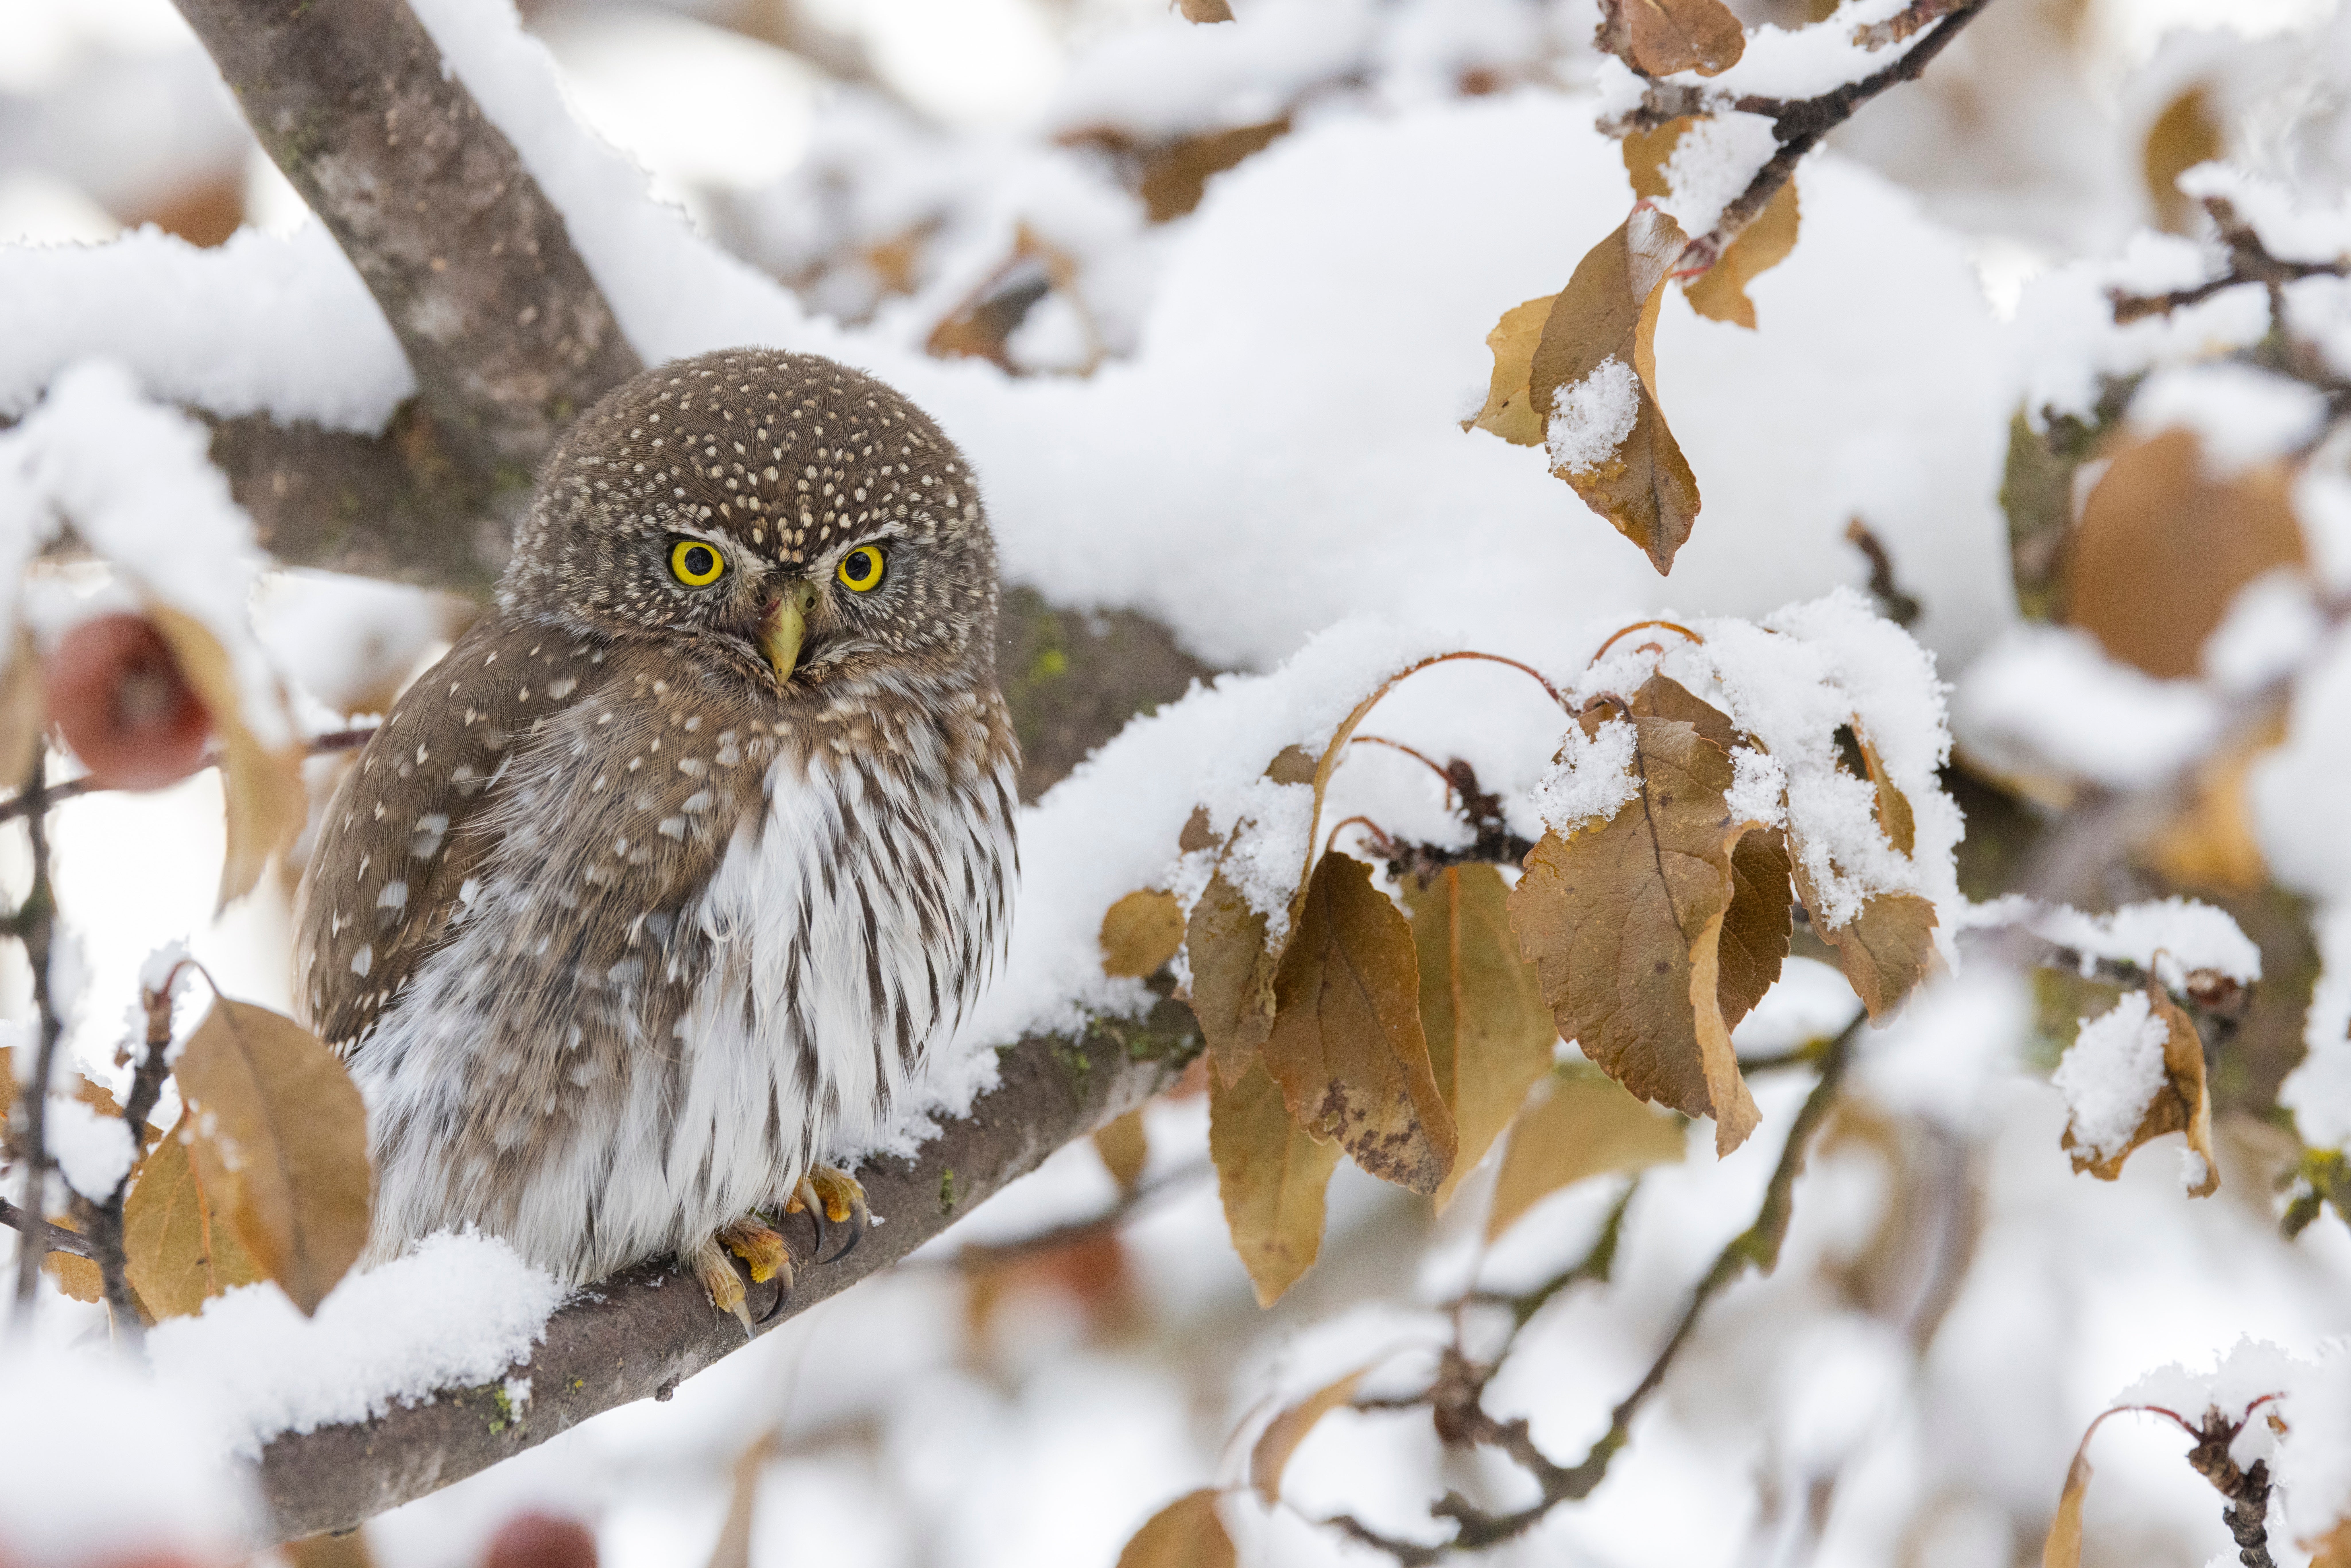 Northern pygmy owl in a tree